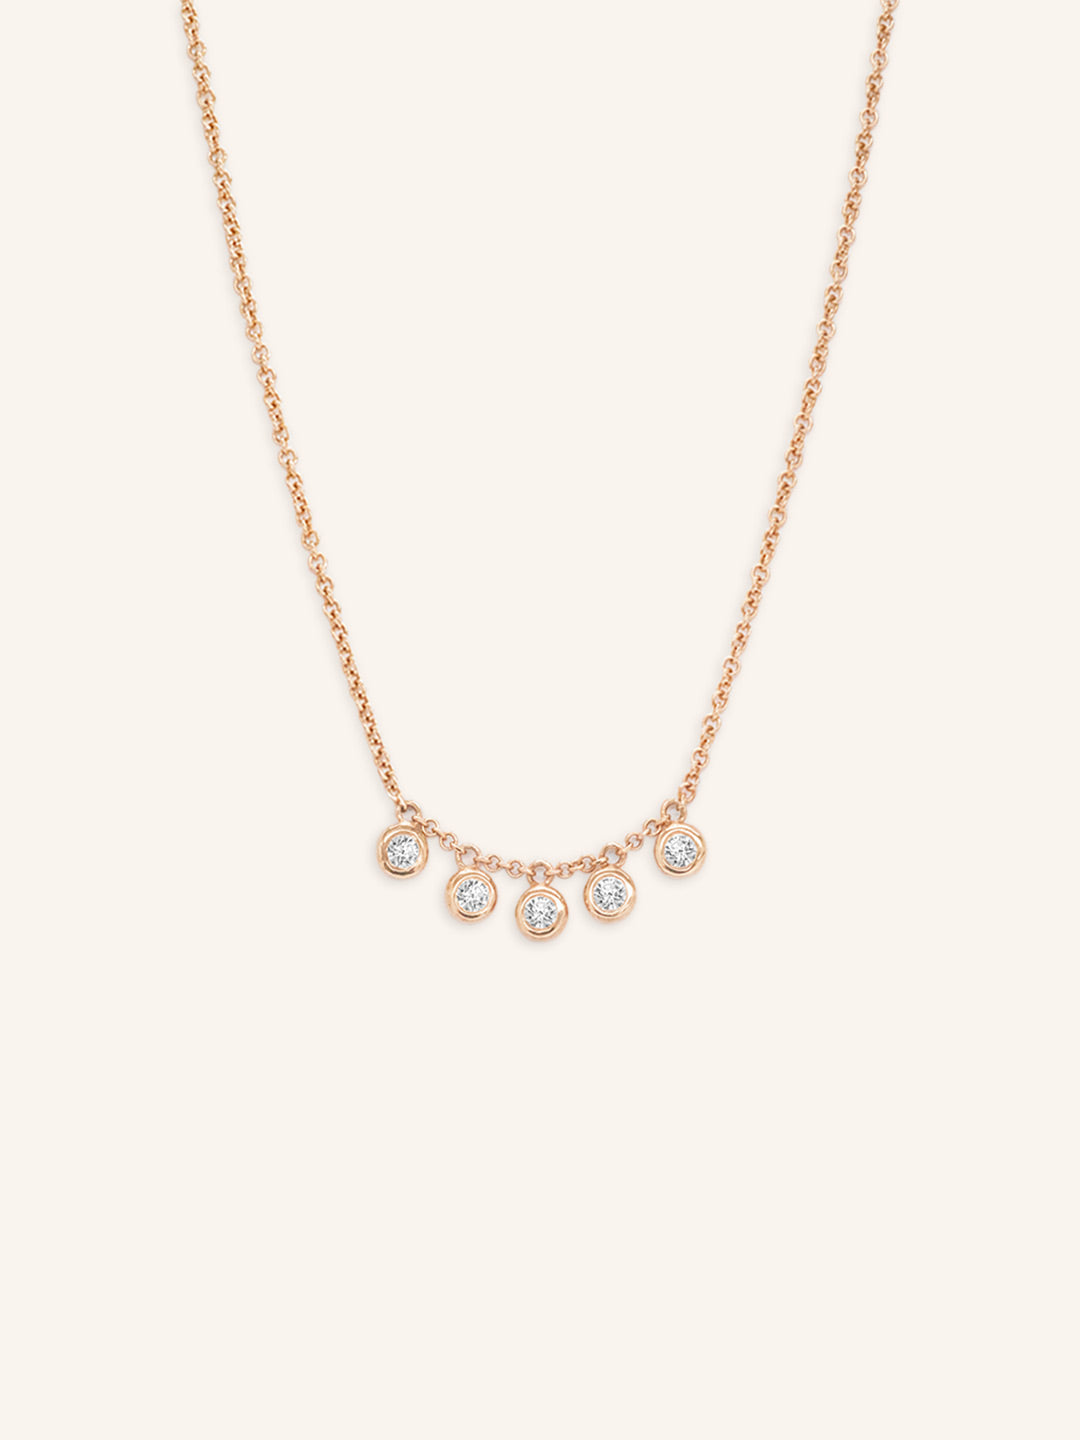 Wander Longingly White Sapphire Necklace